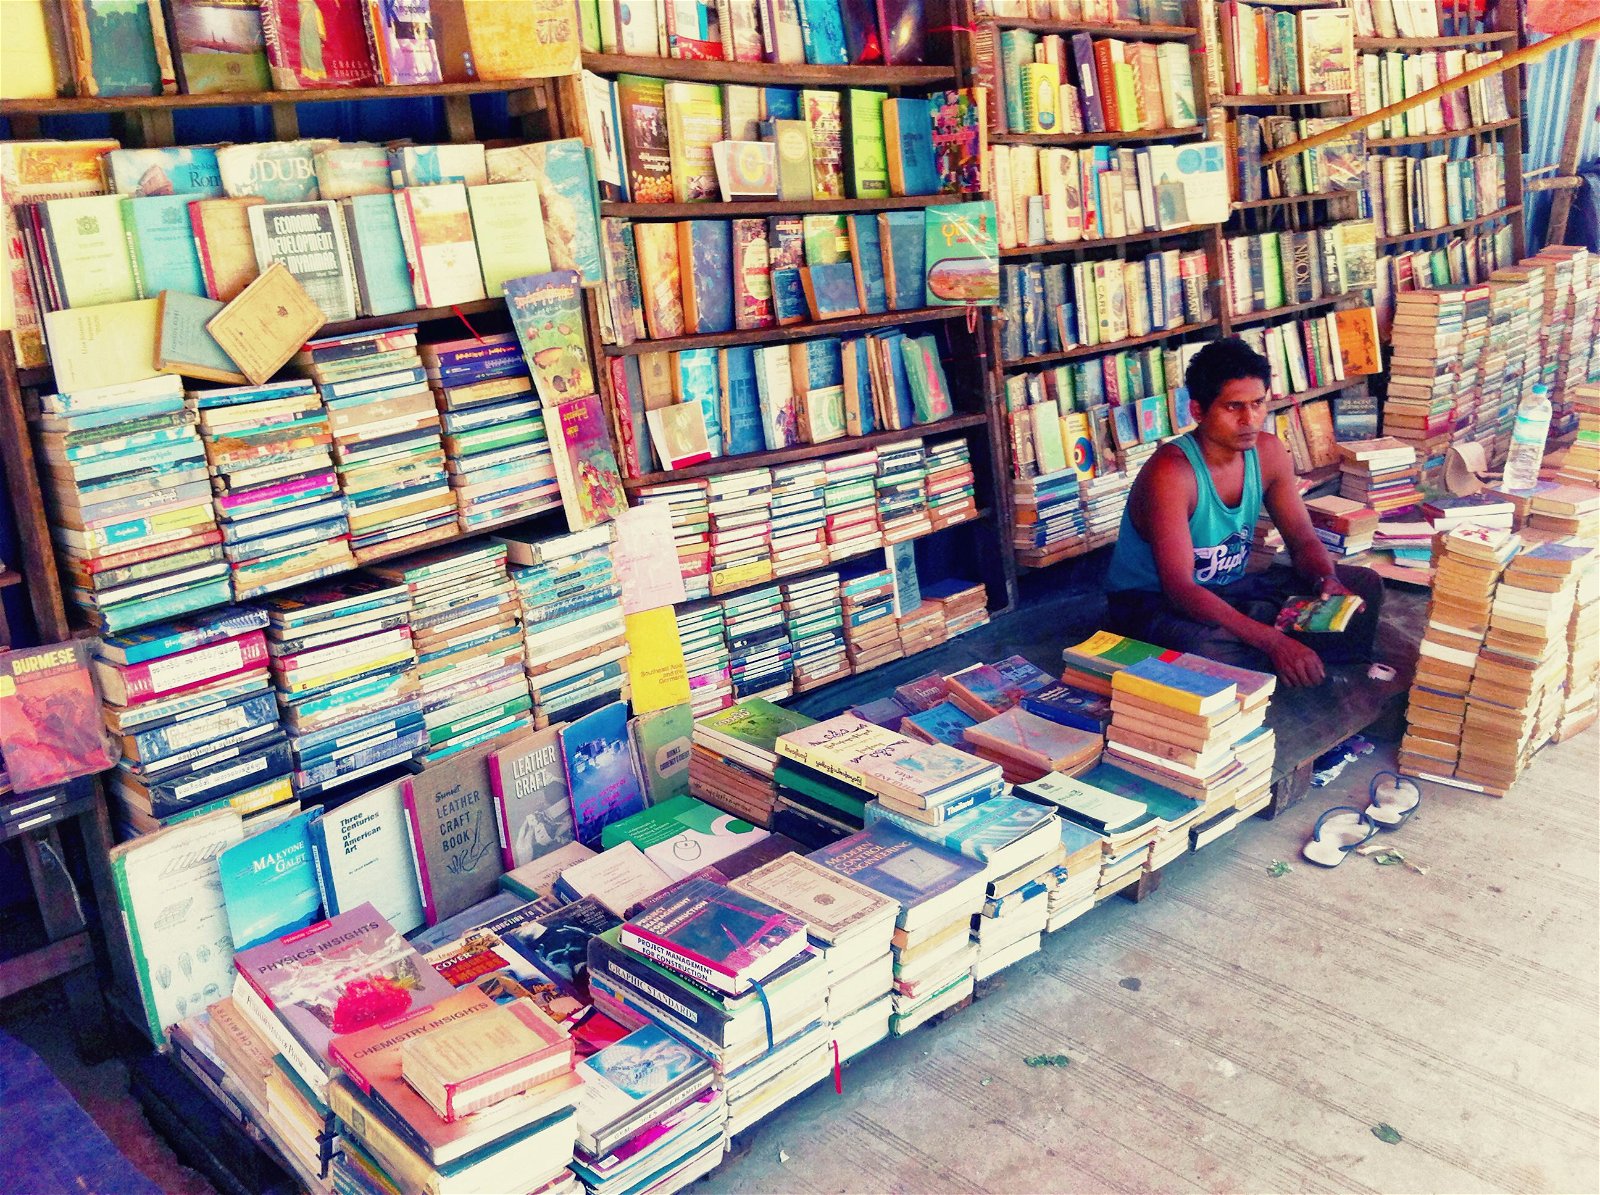 A street photo of a bookseller and shelves and rows of books stacked